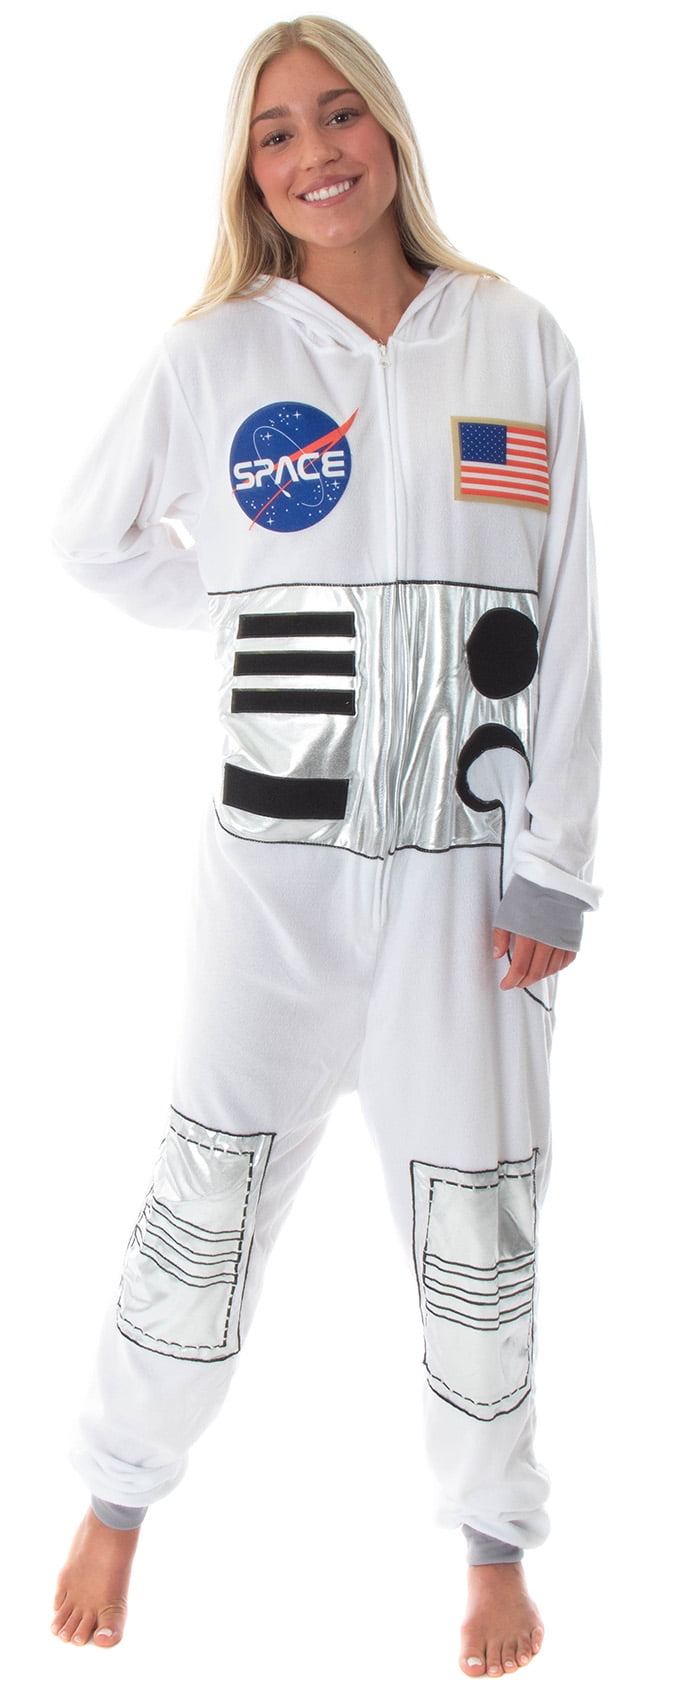 Maxim Party Supplies Kids Astronaut Costume Space Suit Onesie with Embroidered Patches and Pockets 